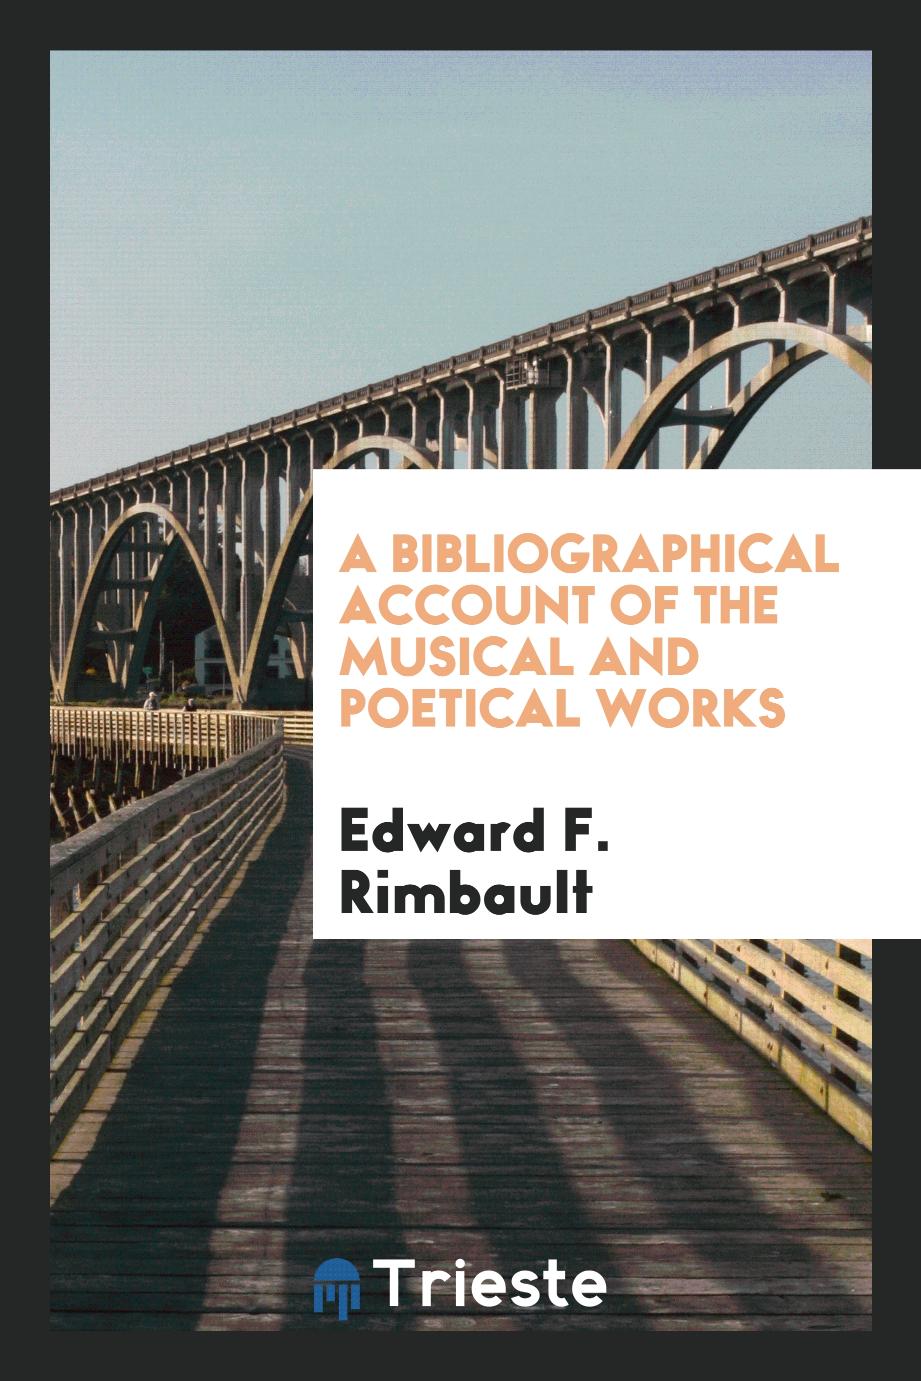 Edward F. Rimbault - A Bibliographical Account of the Musical and Poetical Works